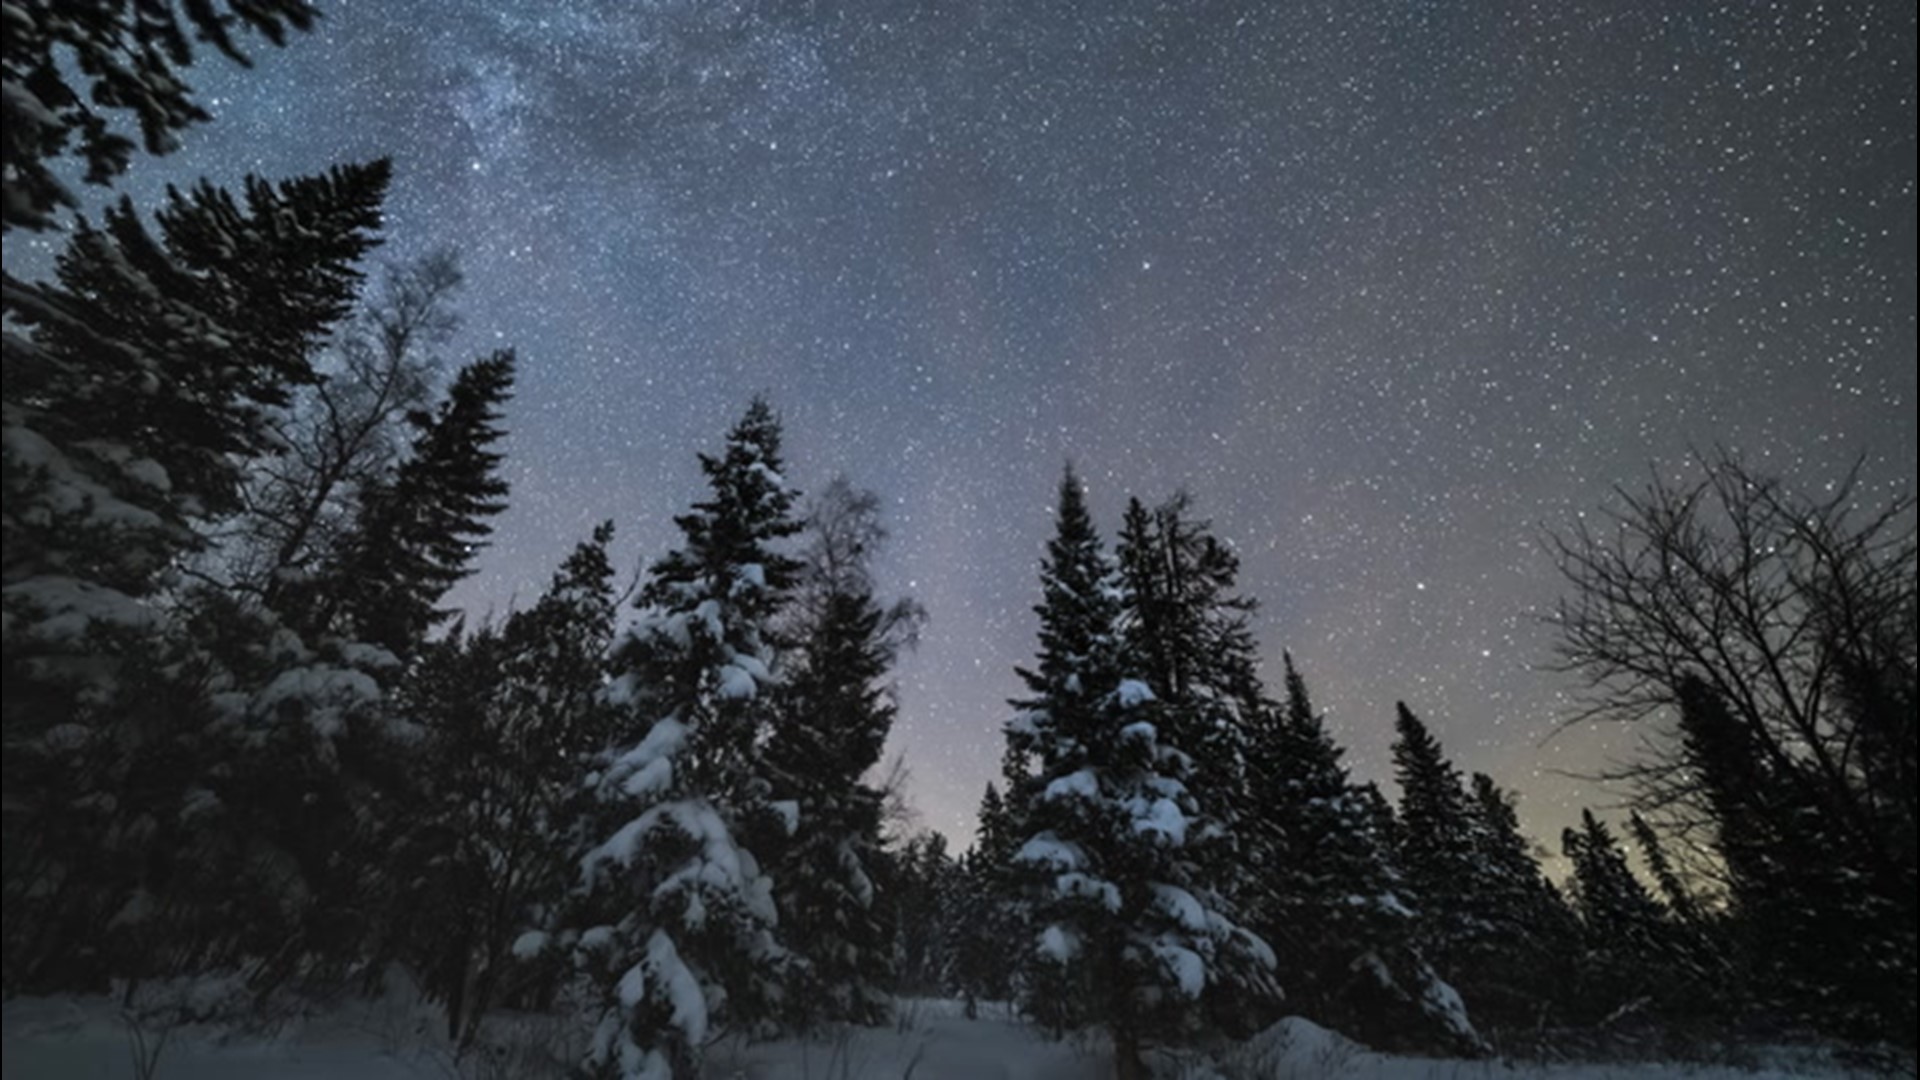 Night skies have something to offer no matter the time of year. It also appears differently depending on the season. Which season offers the best night skies: winter or summer?